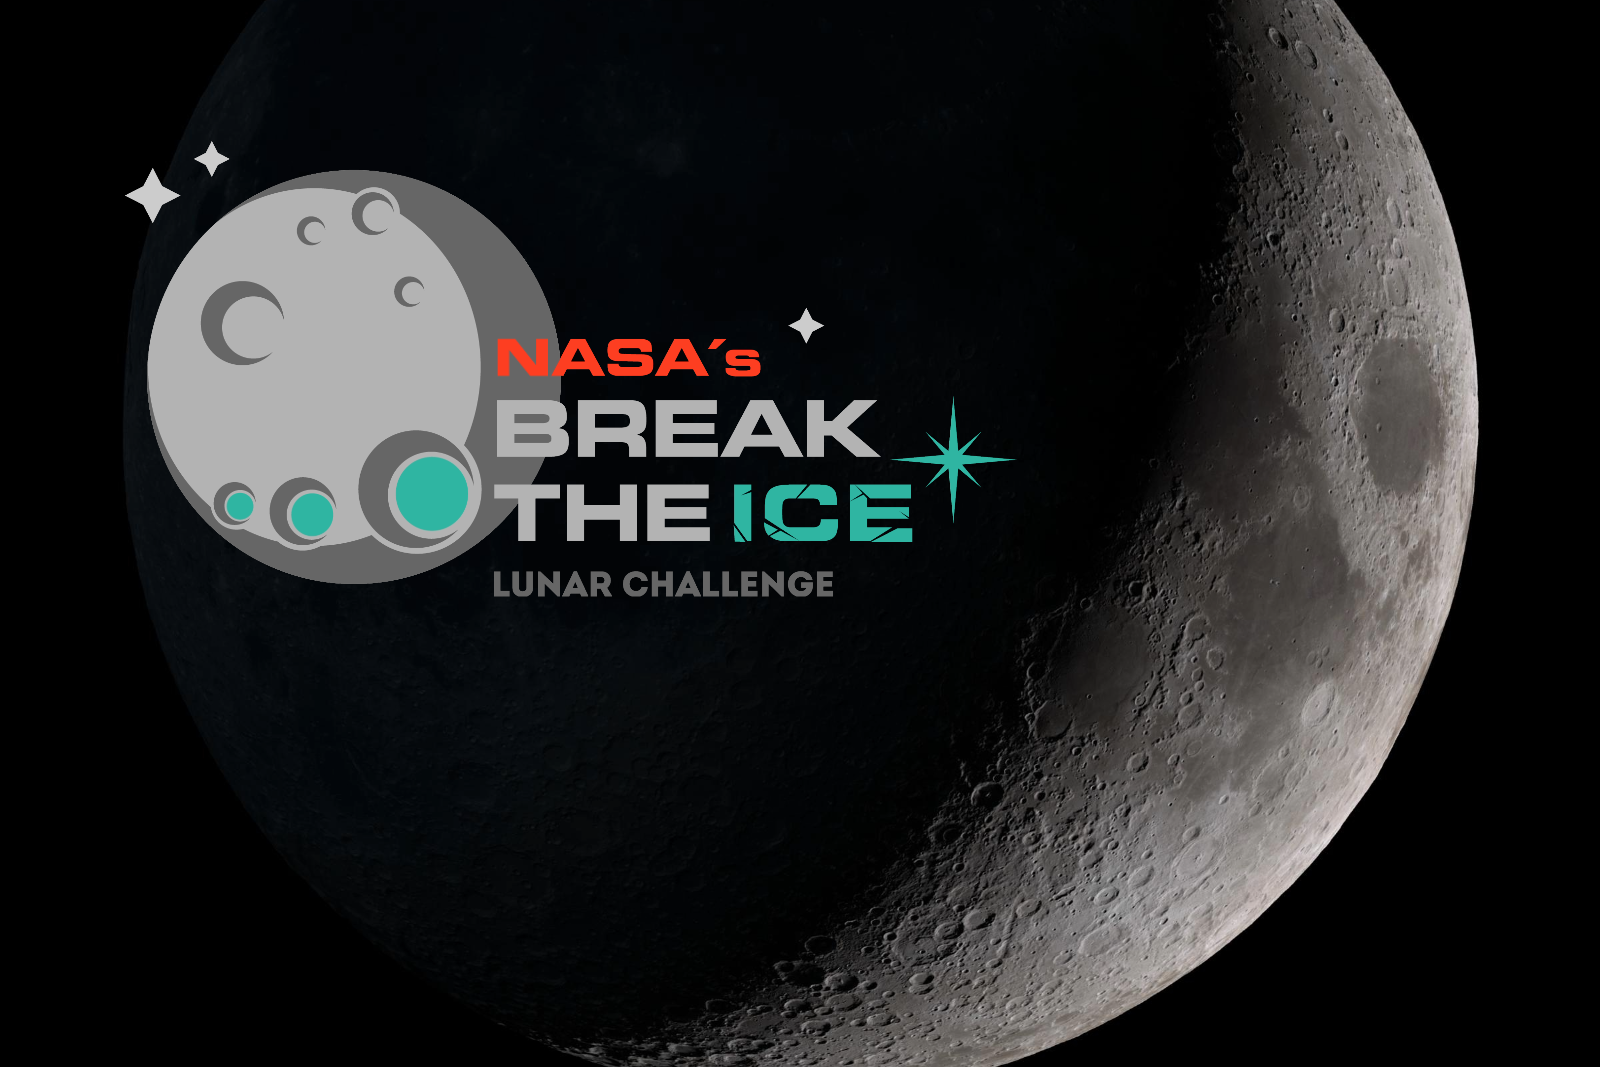 NASA Invites Media to Watch Agency’s Break the Ice Lunar Challenge Final Phase